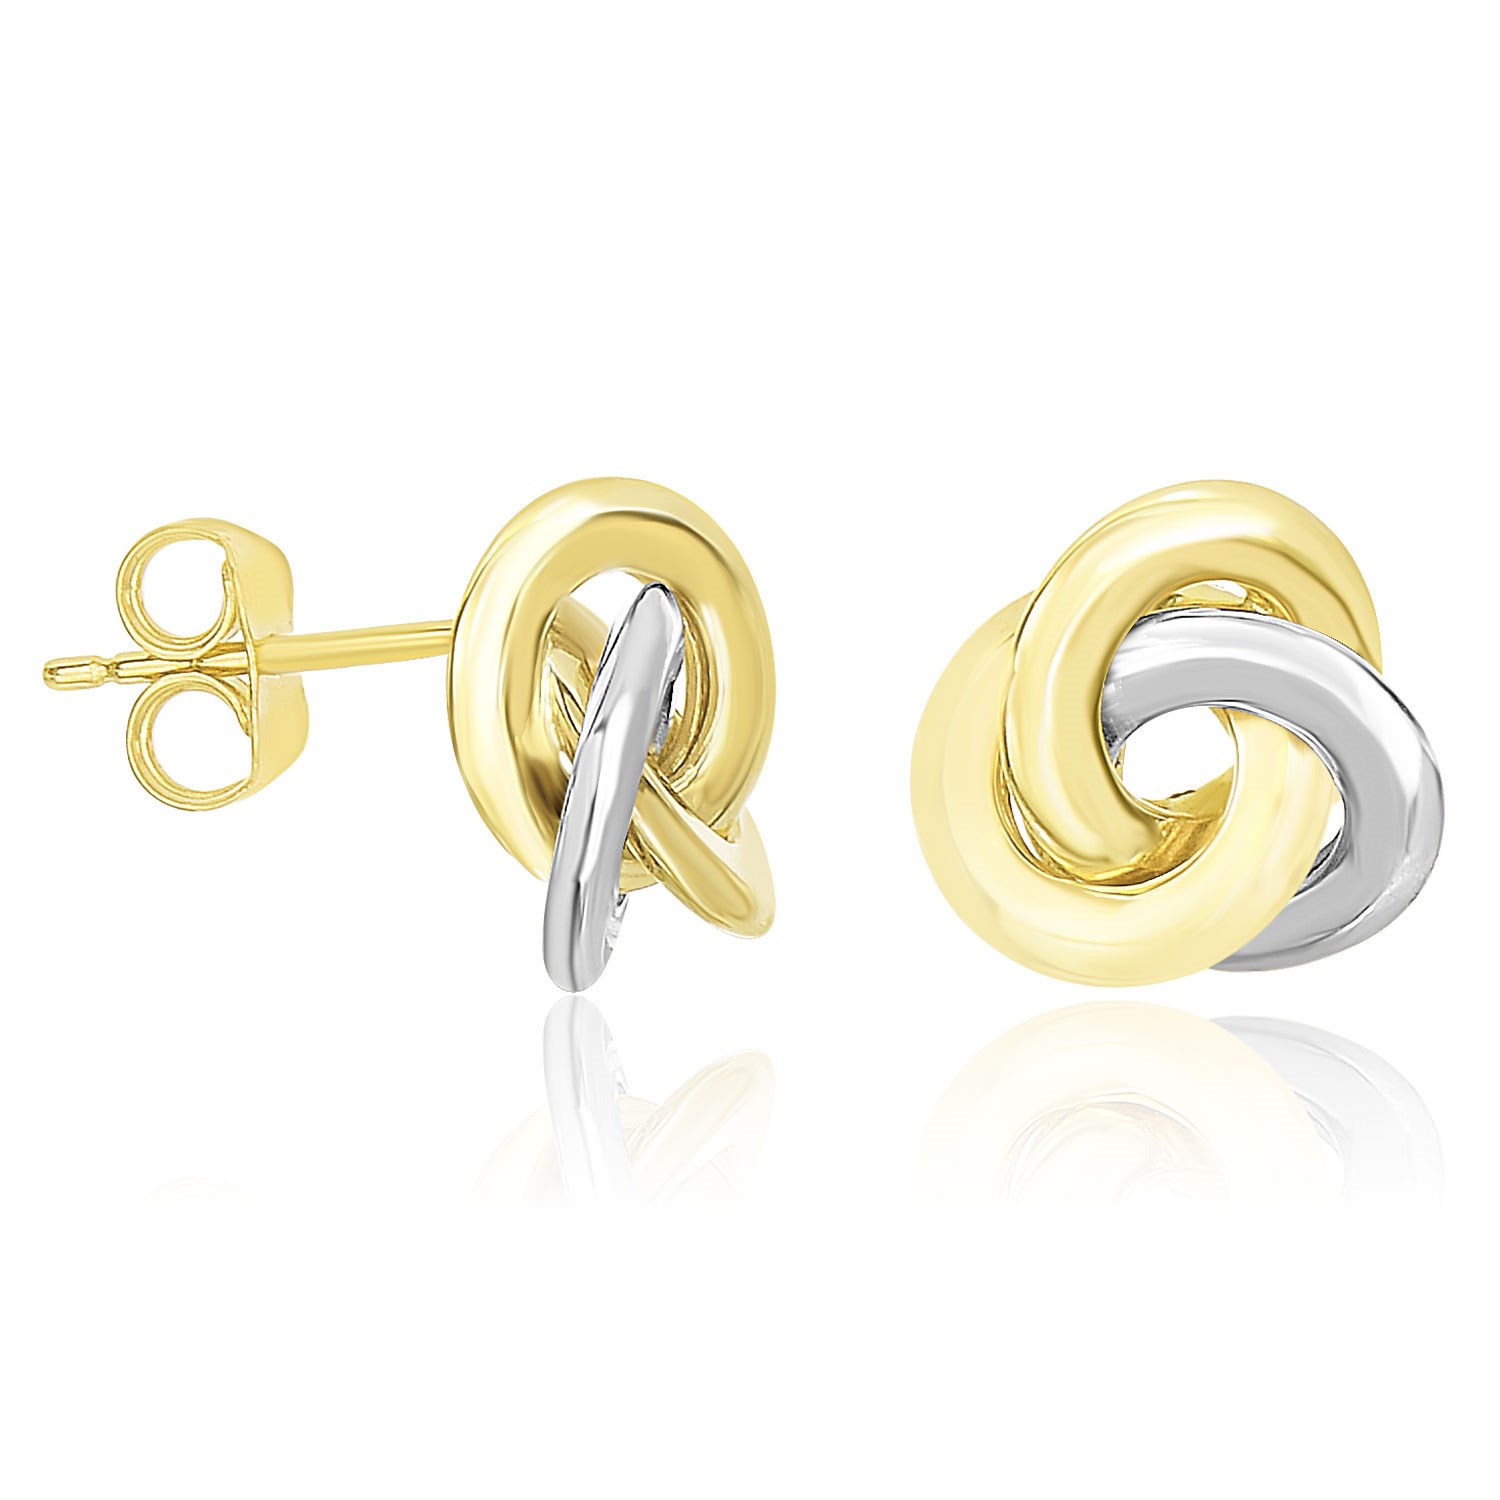 14k Two-Tone Gold Shiny Intertwined Open Circle Earrings